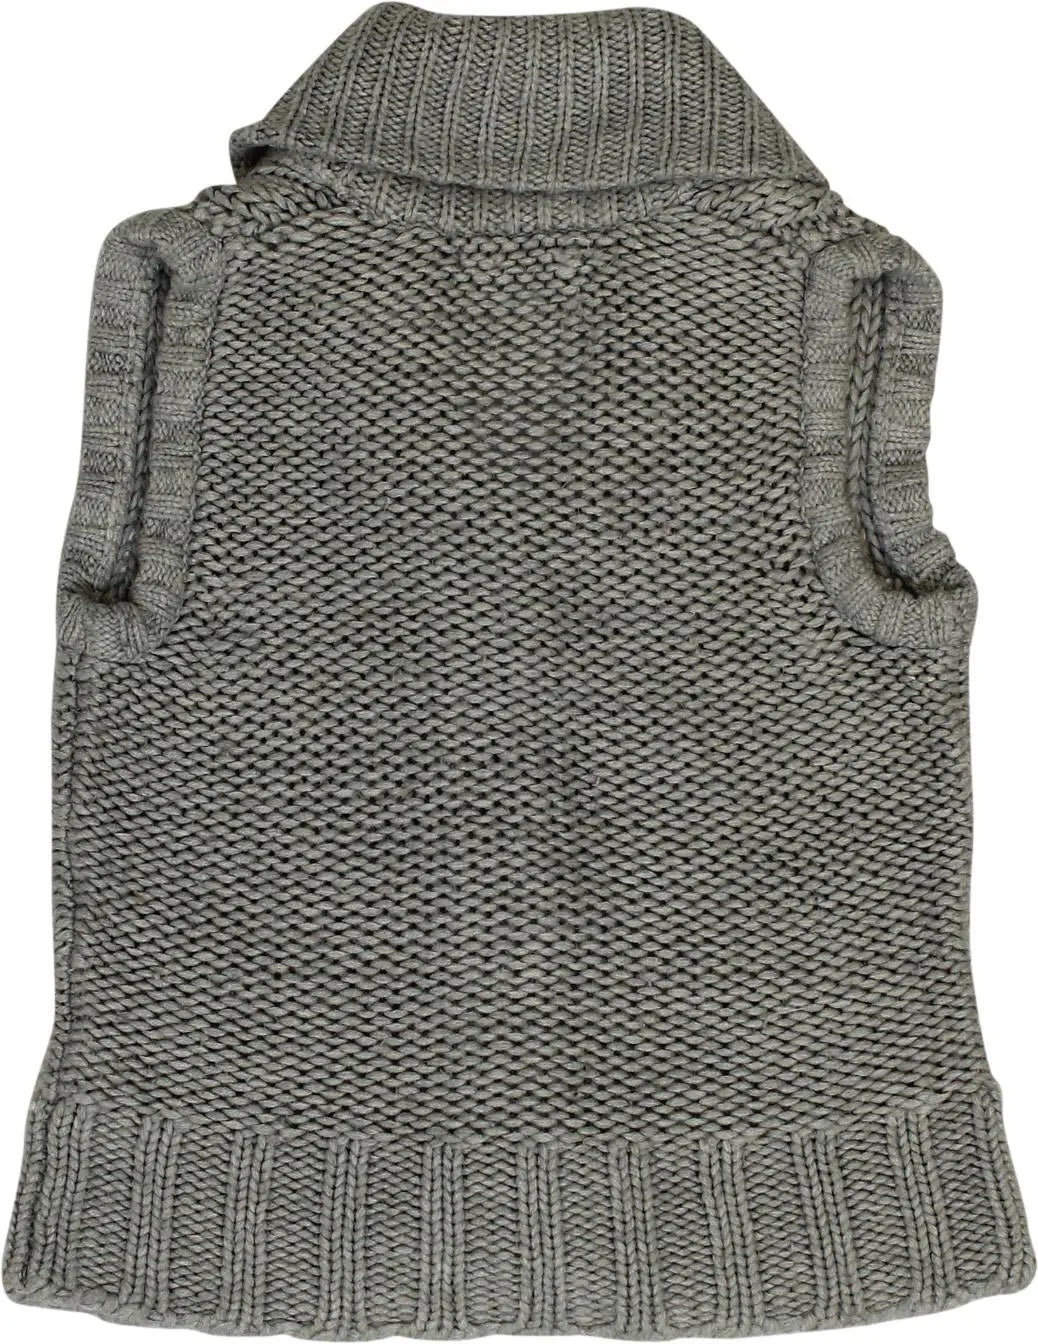 HEMA - Grey Knitted Sleeveless Cardigan- ThriftTale.com - Vintage and second handclothing